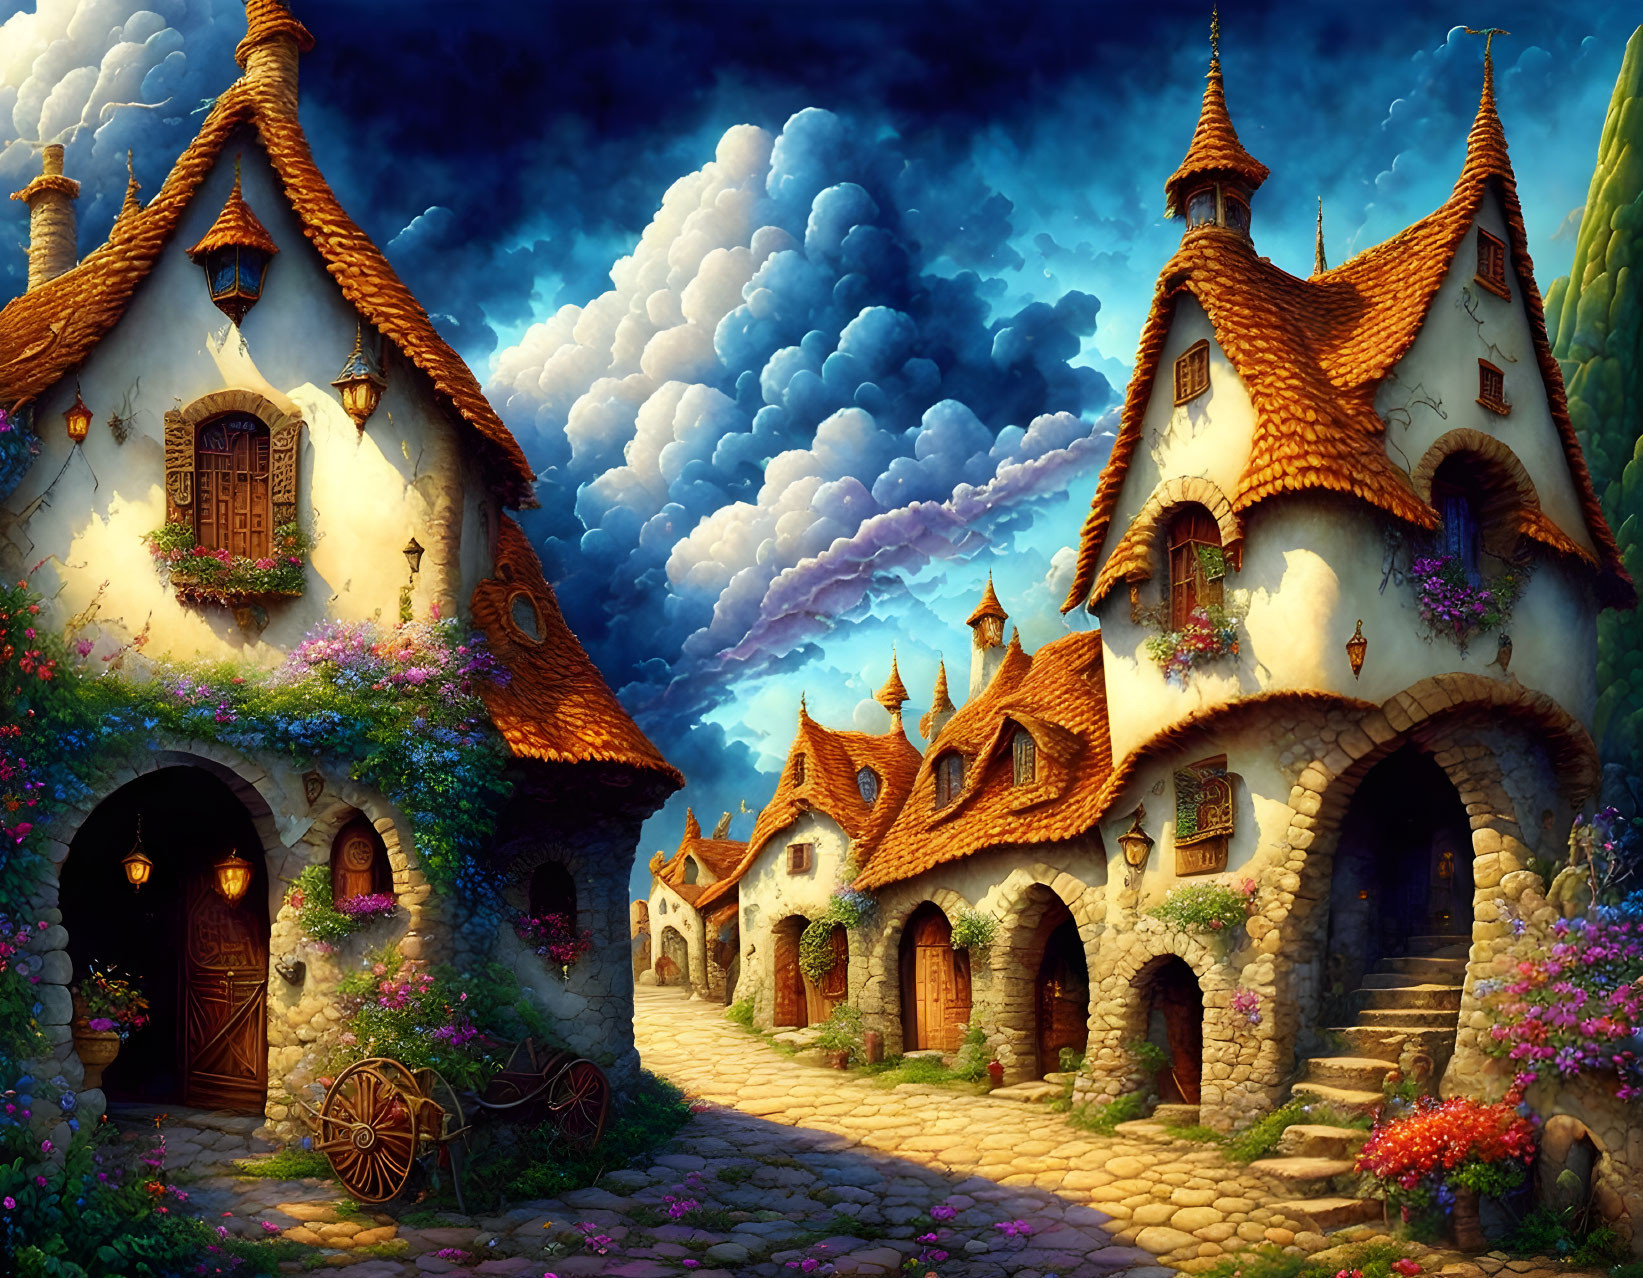 Whimsical fantasy village with vibrant cottages and dramatic twilight sky